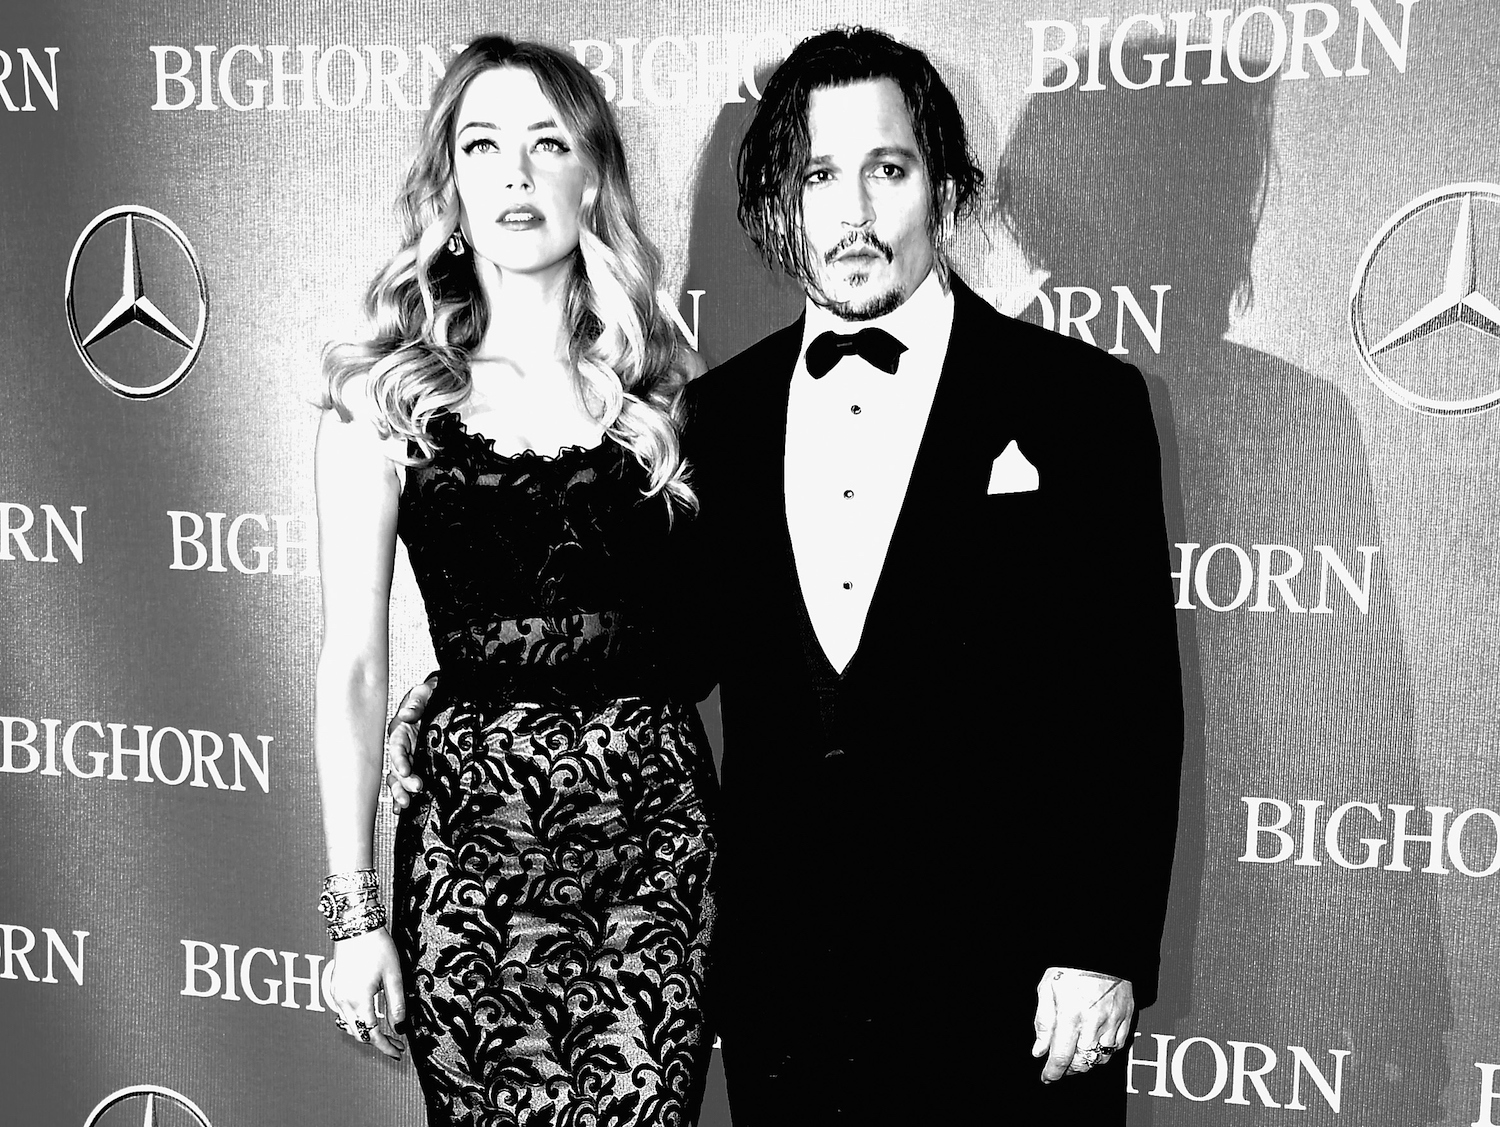 PALM SPRINGS, CA - JANUARY 02: (EDITORS NOTE: Image Converted from Color to BW). Actors Amber Heard and Johnny Depp arrive at the 27th Annual Palm Springs International Film Festival Awards Gala at Palm Springs Convention Center on January 2, 2016 in Palm Springs, California. (Photo by Frazer Harrison/Getty Images)